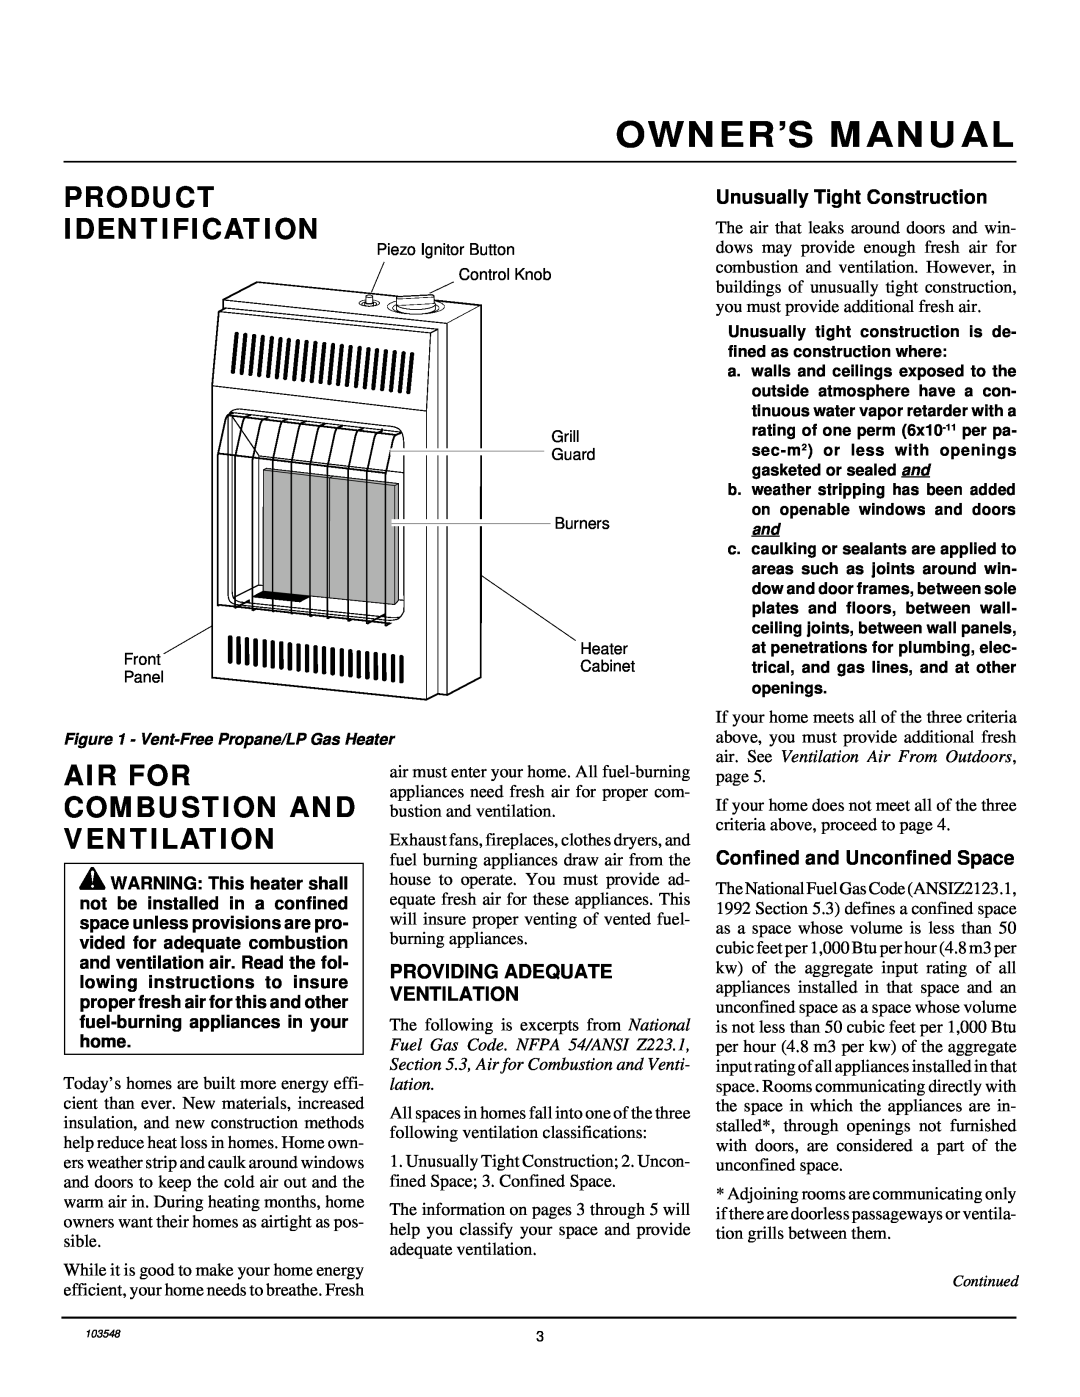 Desa CGP10RL installation manual Product Identification, Air For Combustion And Ventilation, Unusually Tight Construction 